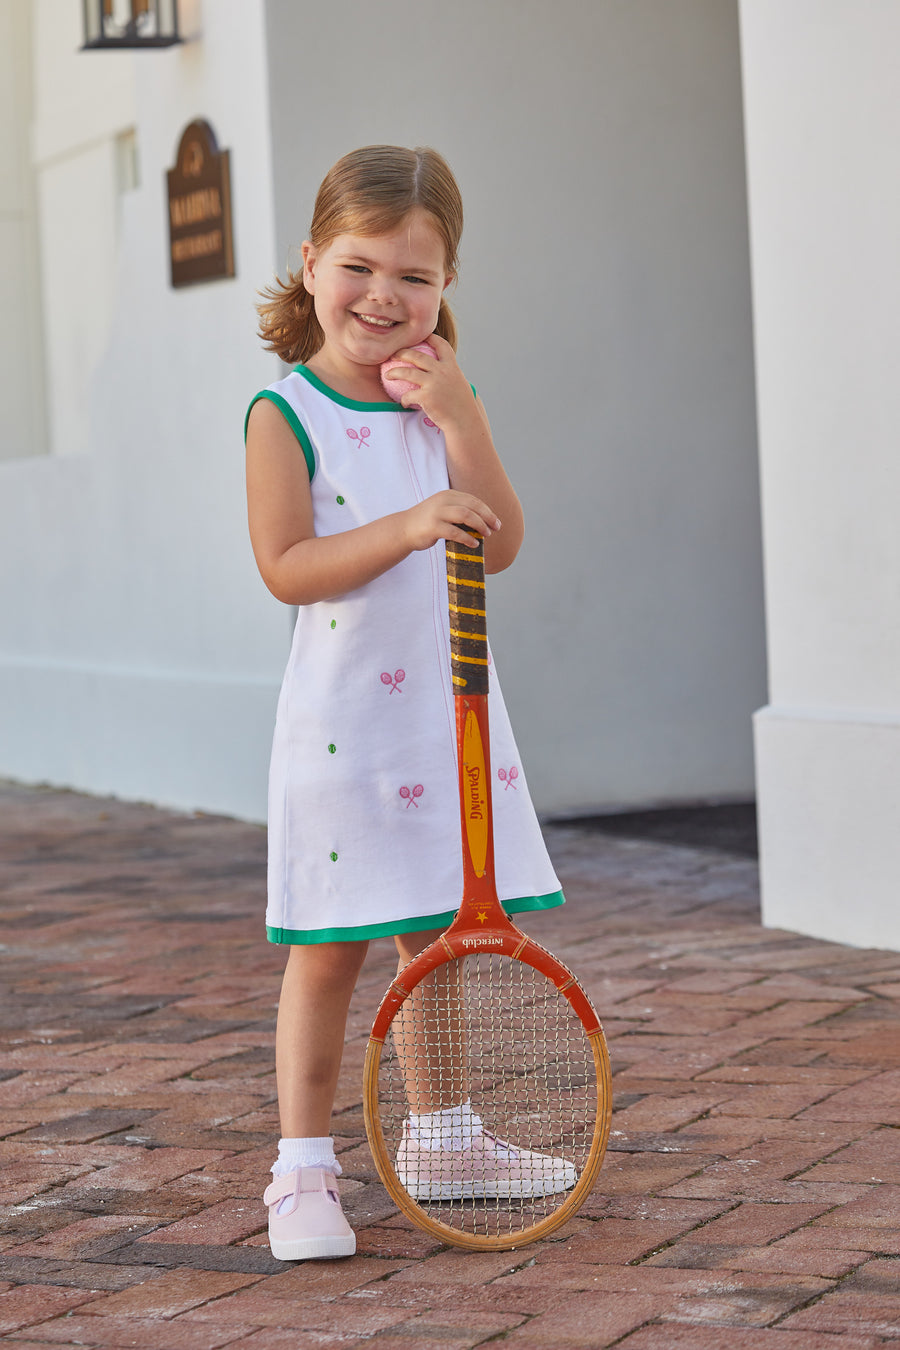 Little English traditional children's clothing, girl's casual white knit dress for Spring with green trim around the edges and pink and green tennis-themed embroidery